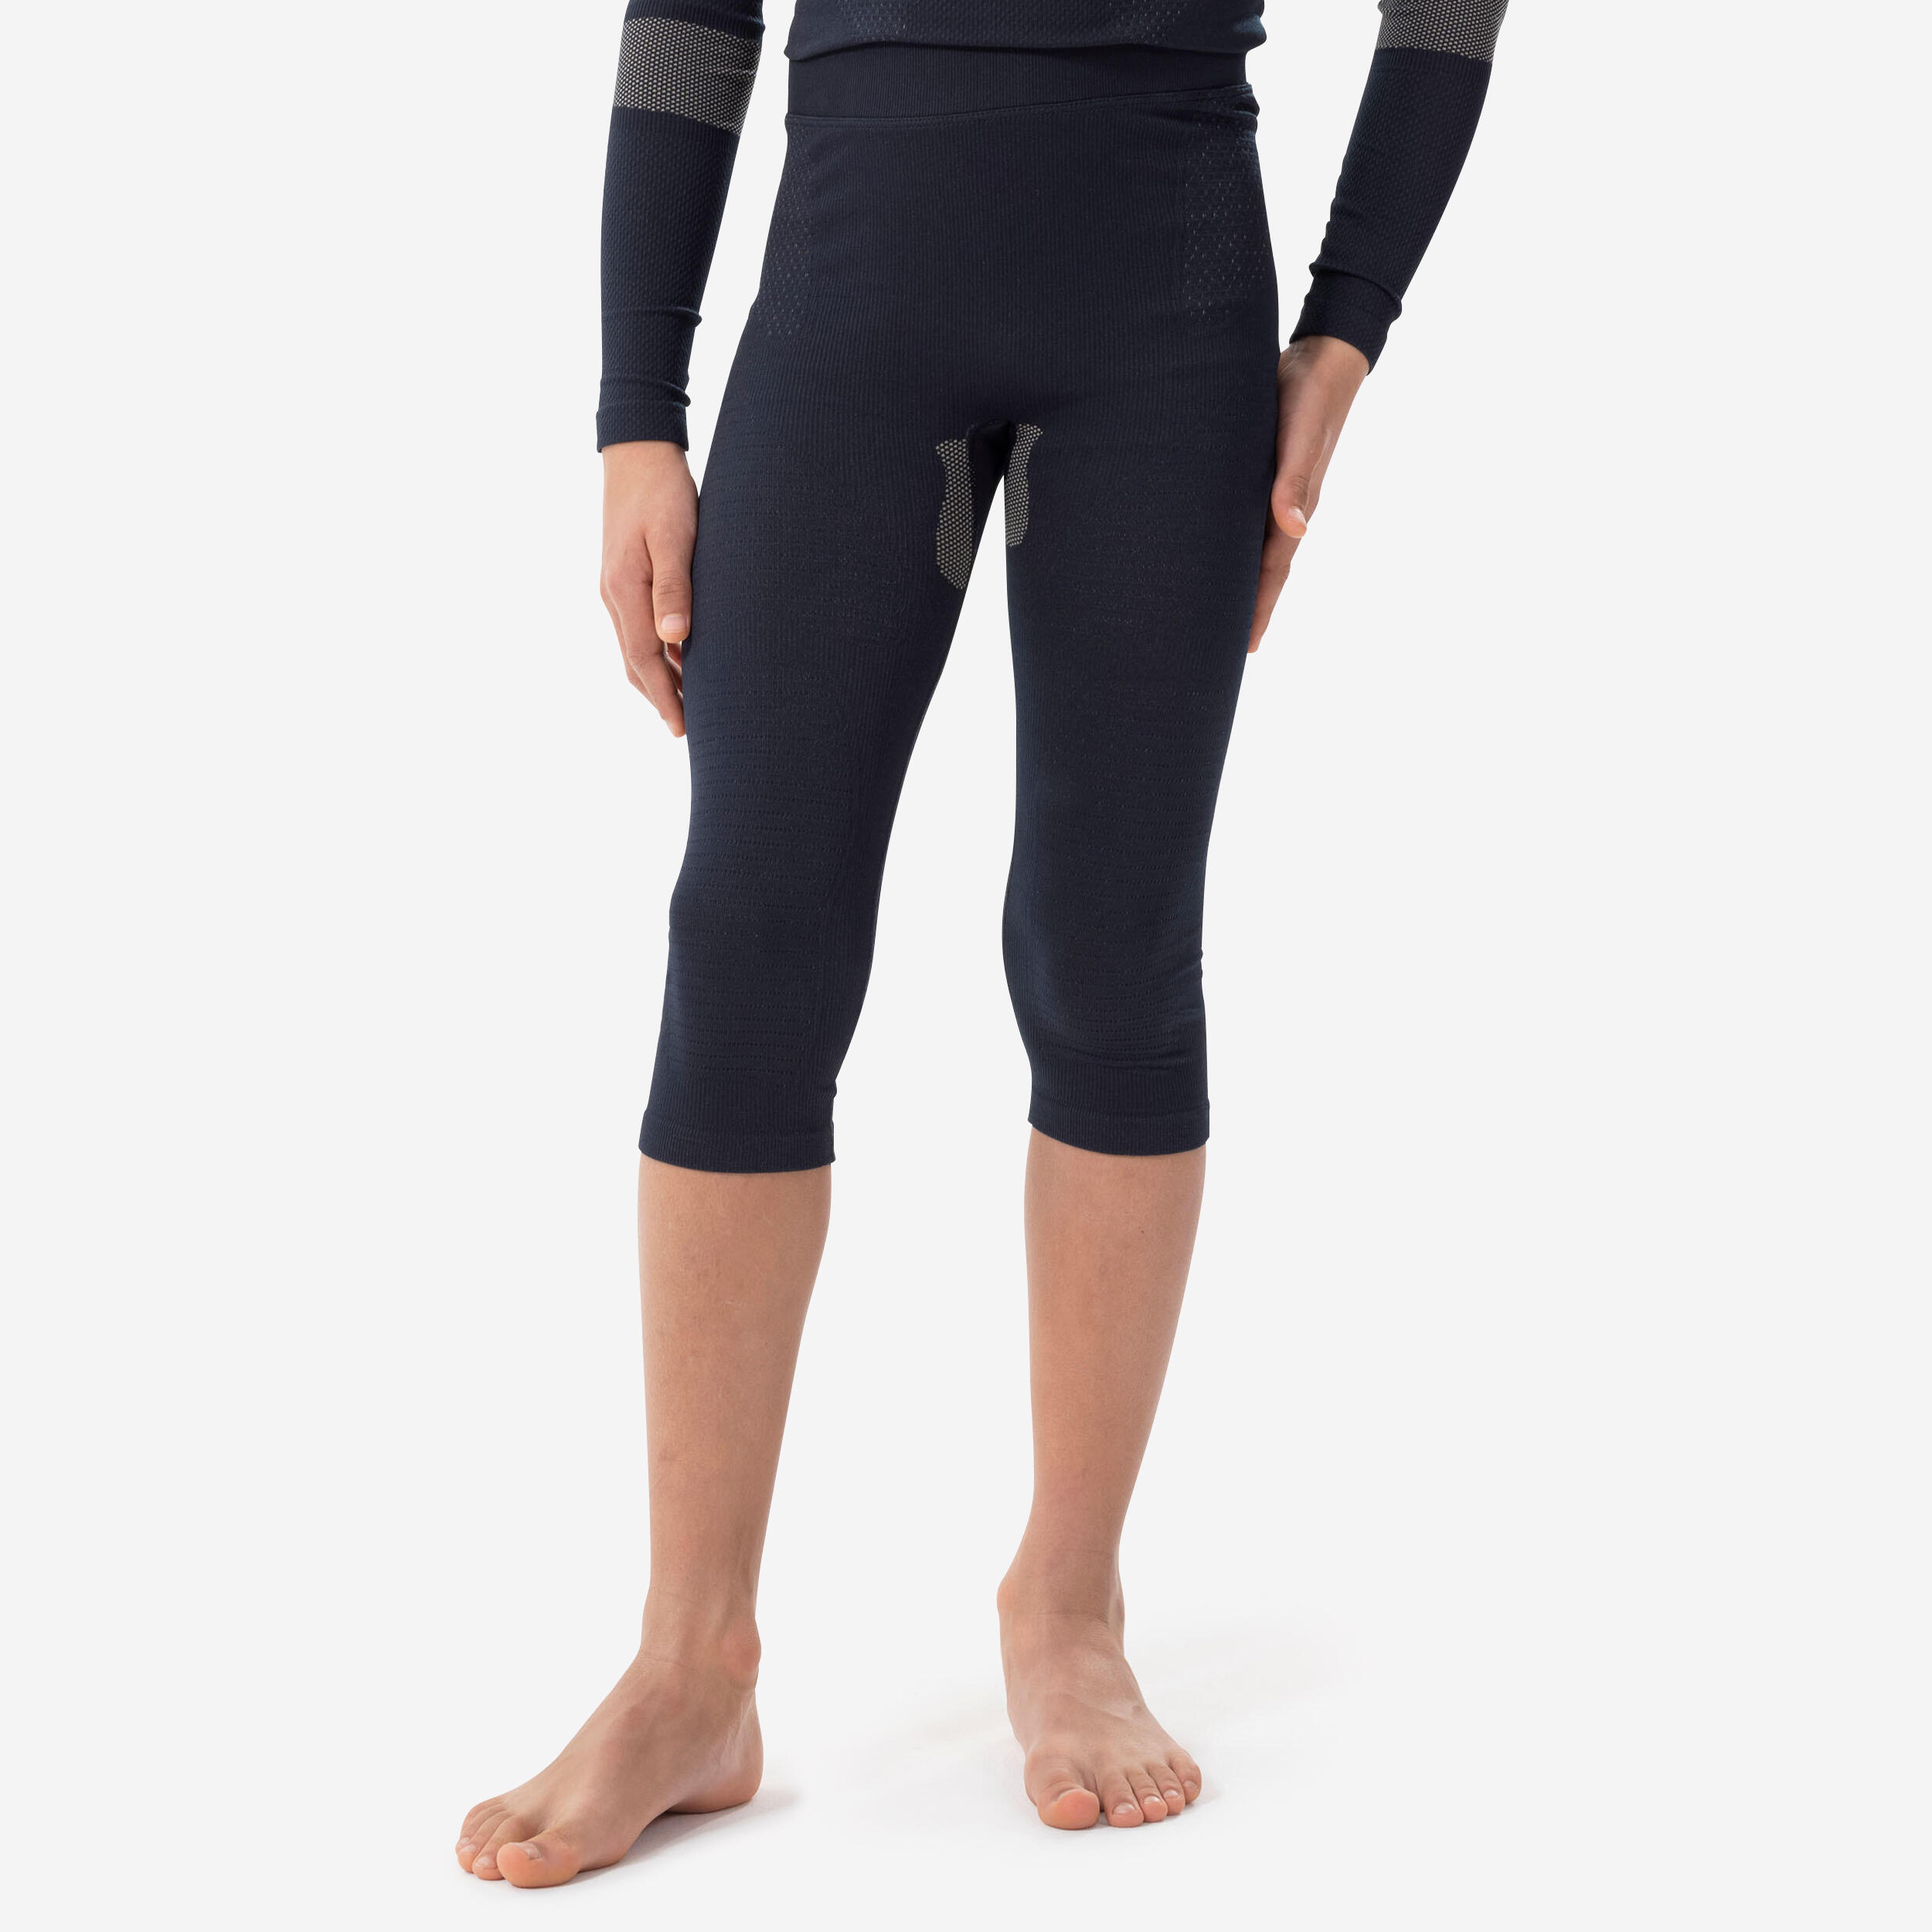 Kids’ Breathable Base Layer Bottoms